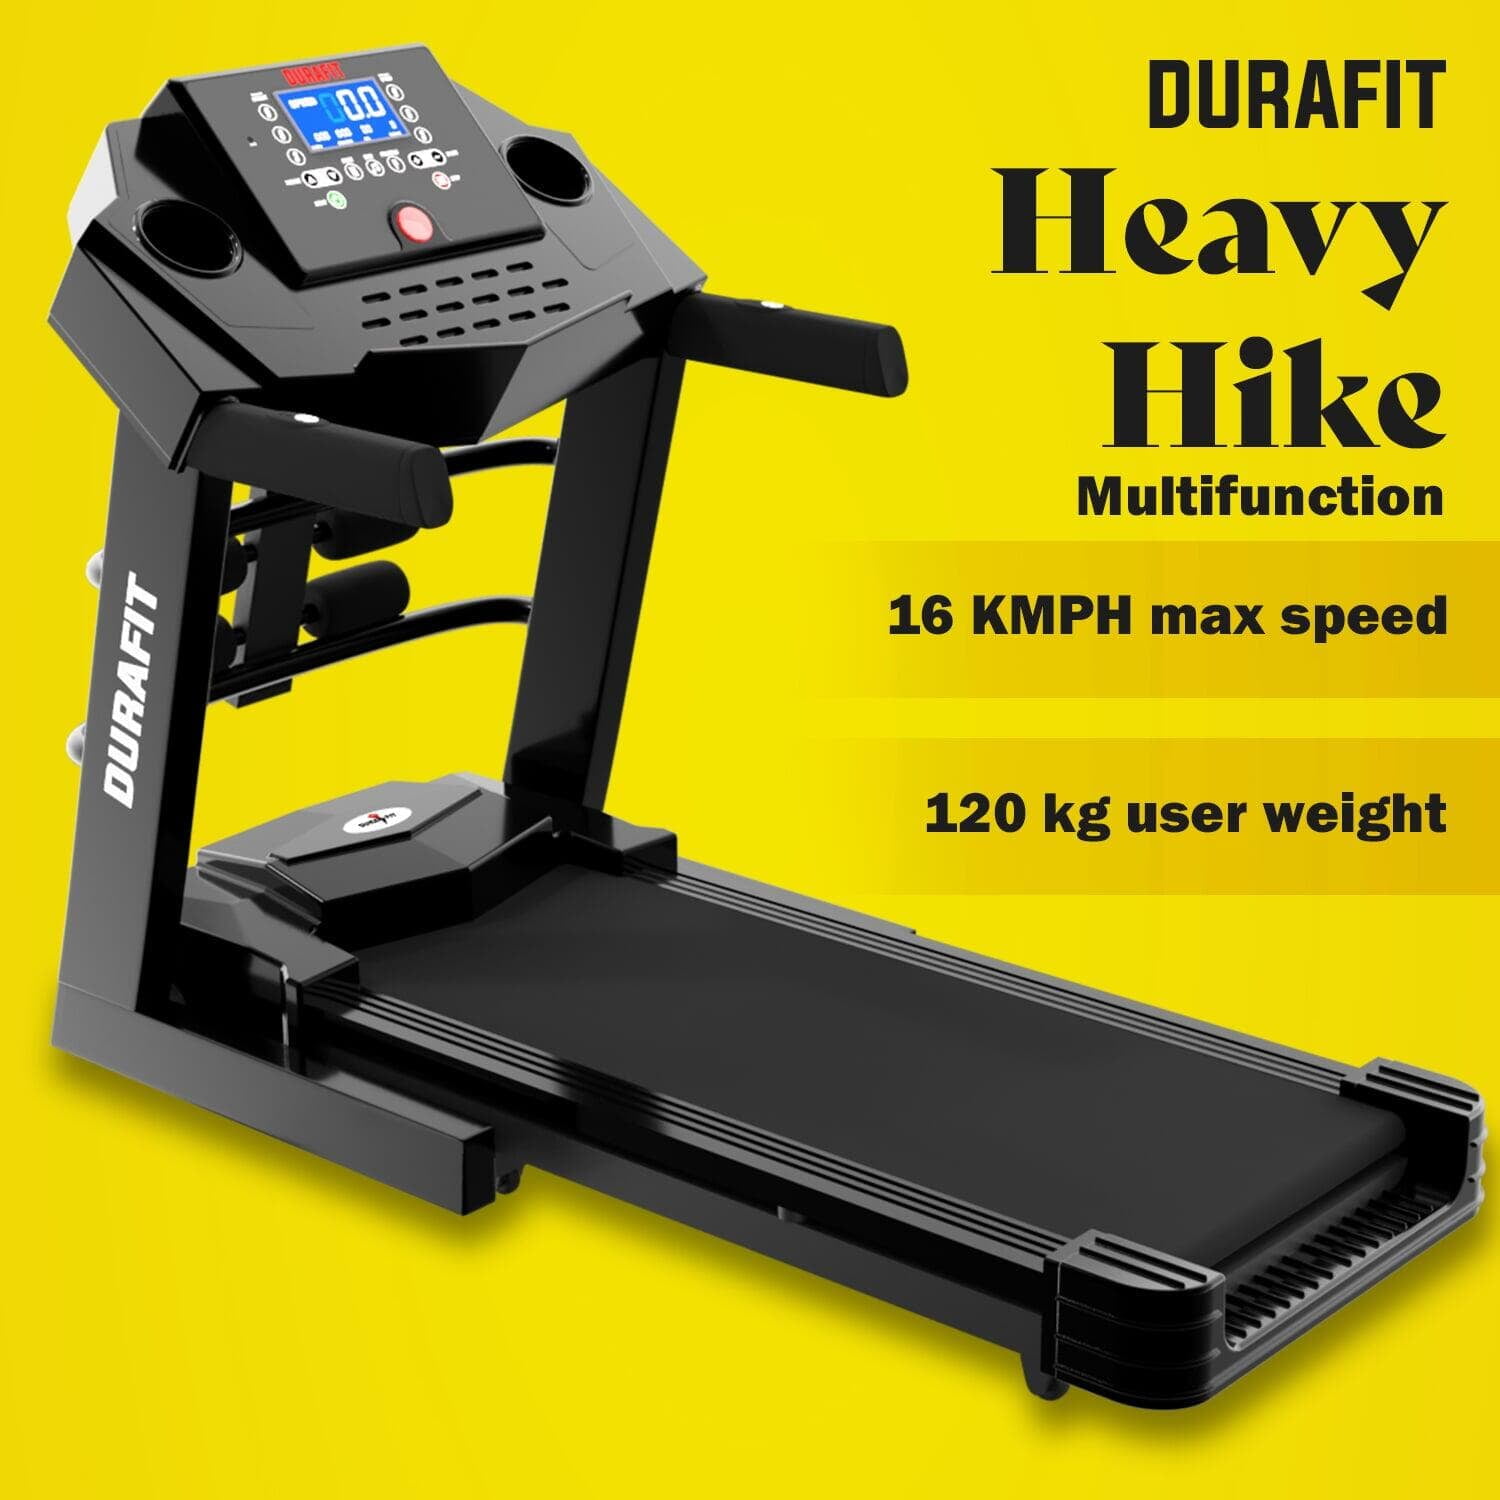 Durafit Heavy hike Multifunction Treadmill with wide running surface